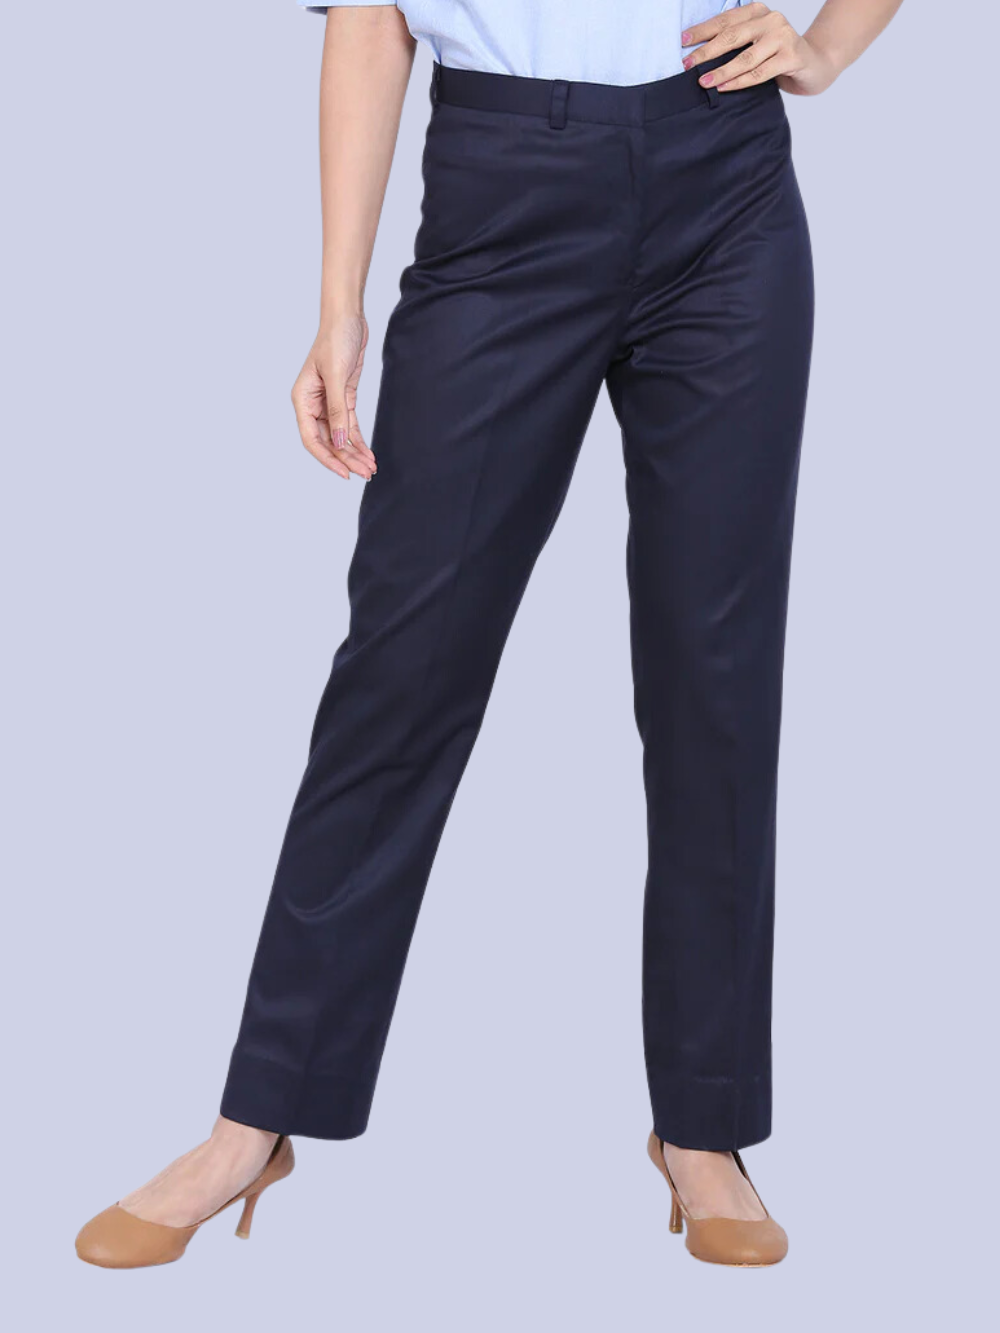 Buy Black Parallel Trousers for Women Online in India